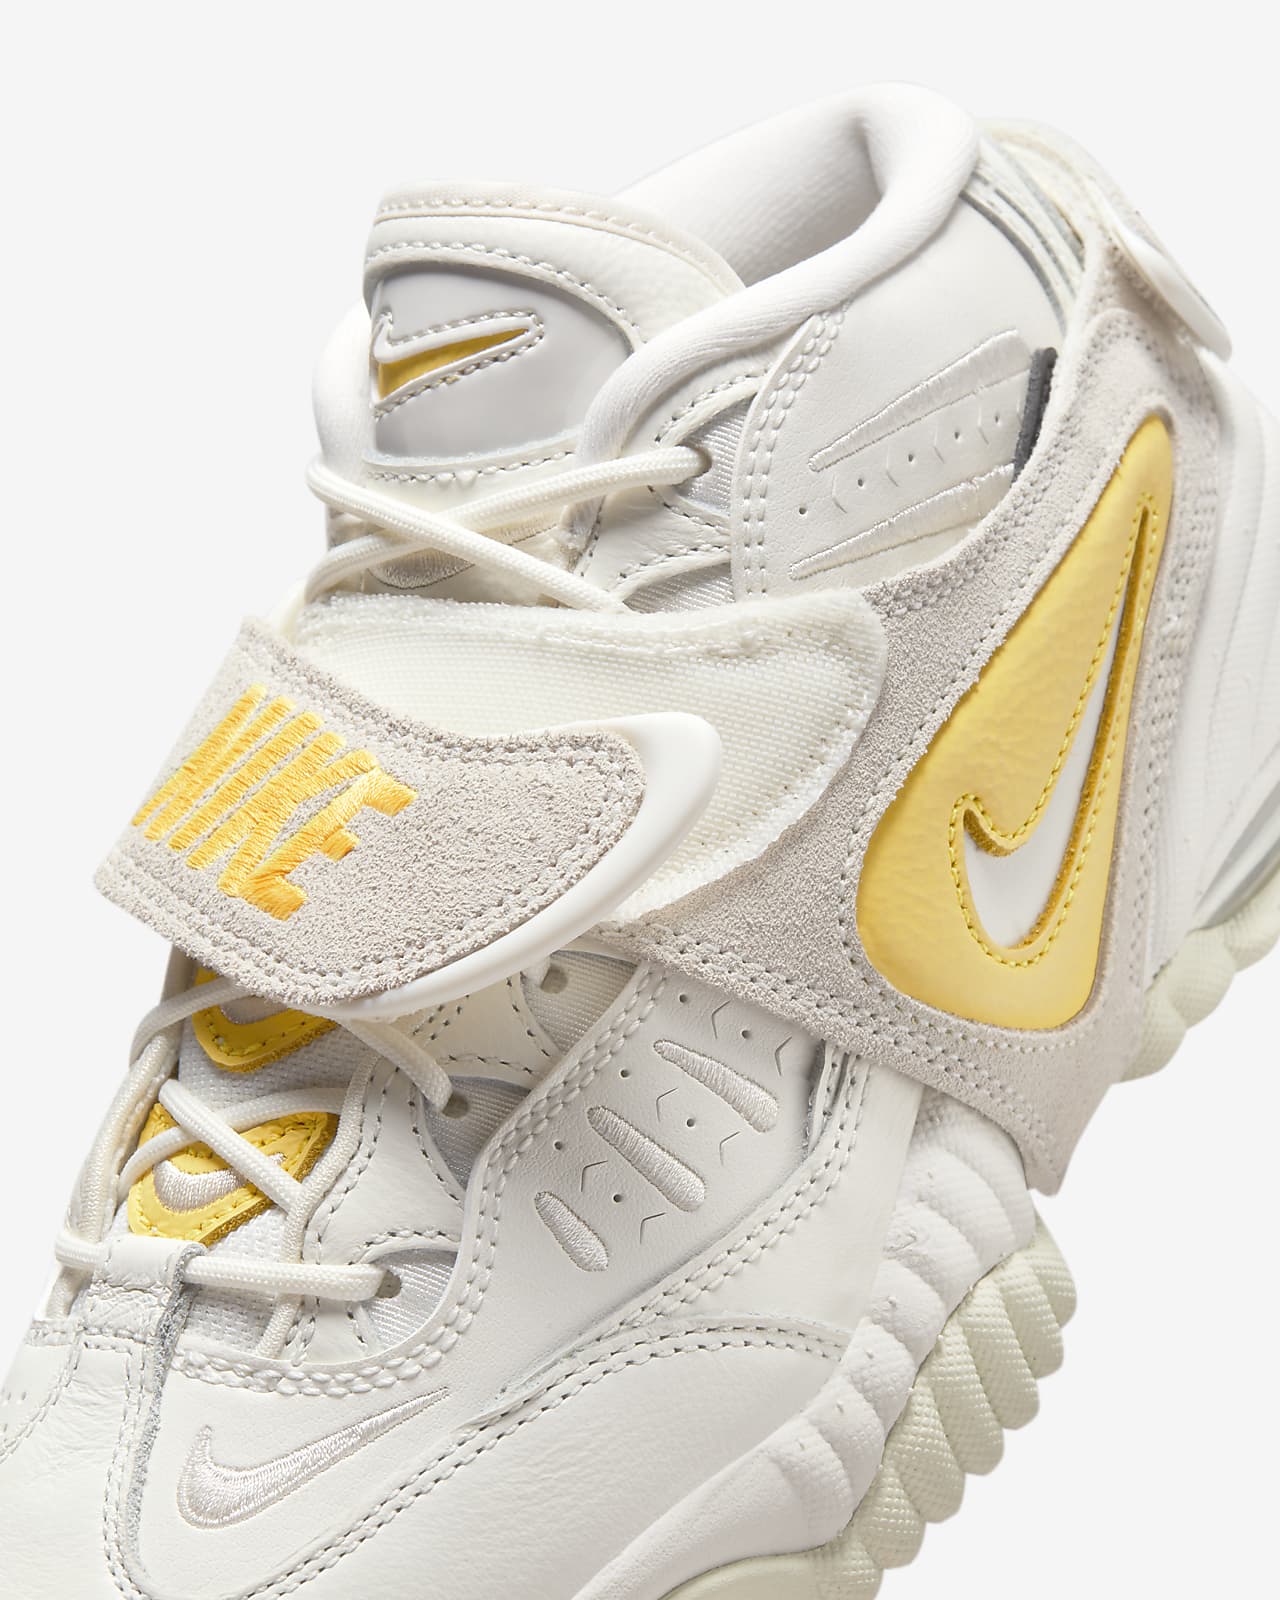 Mens Nike Air Barrage Mid Shoes